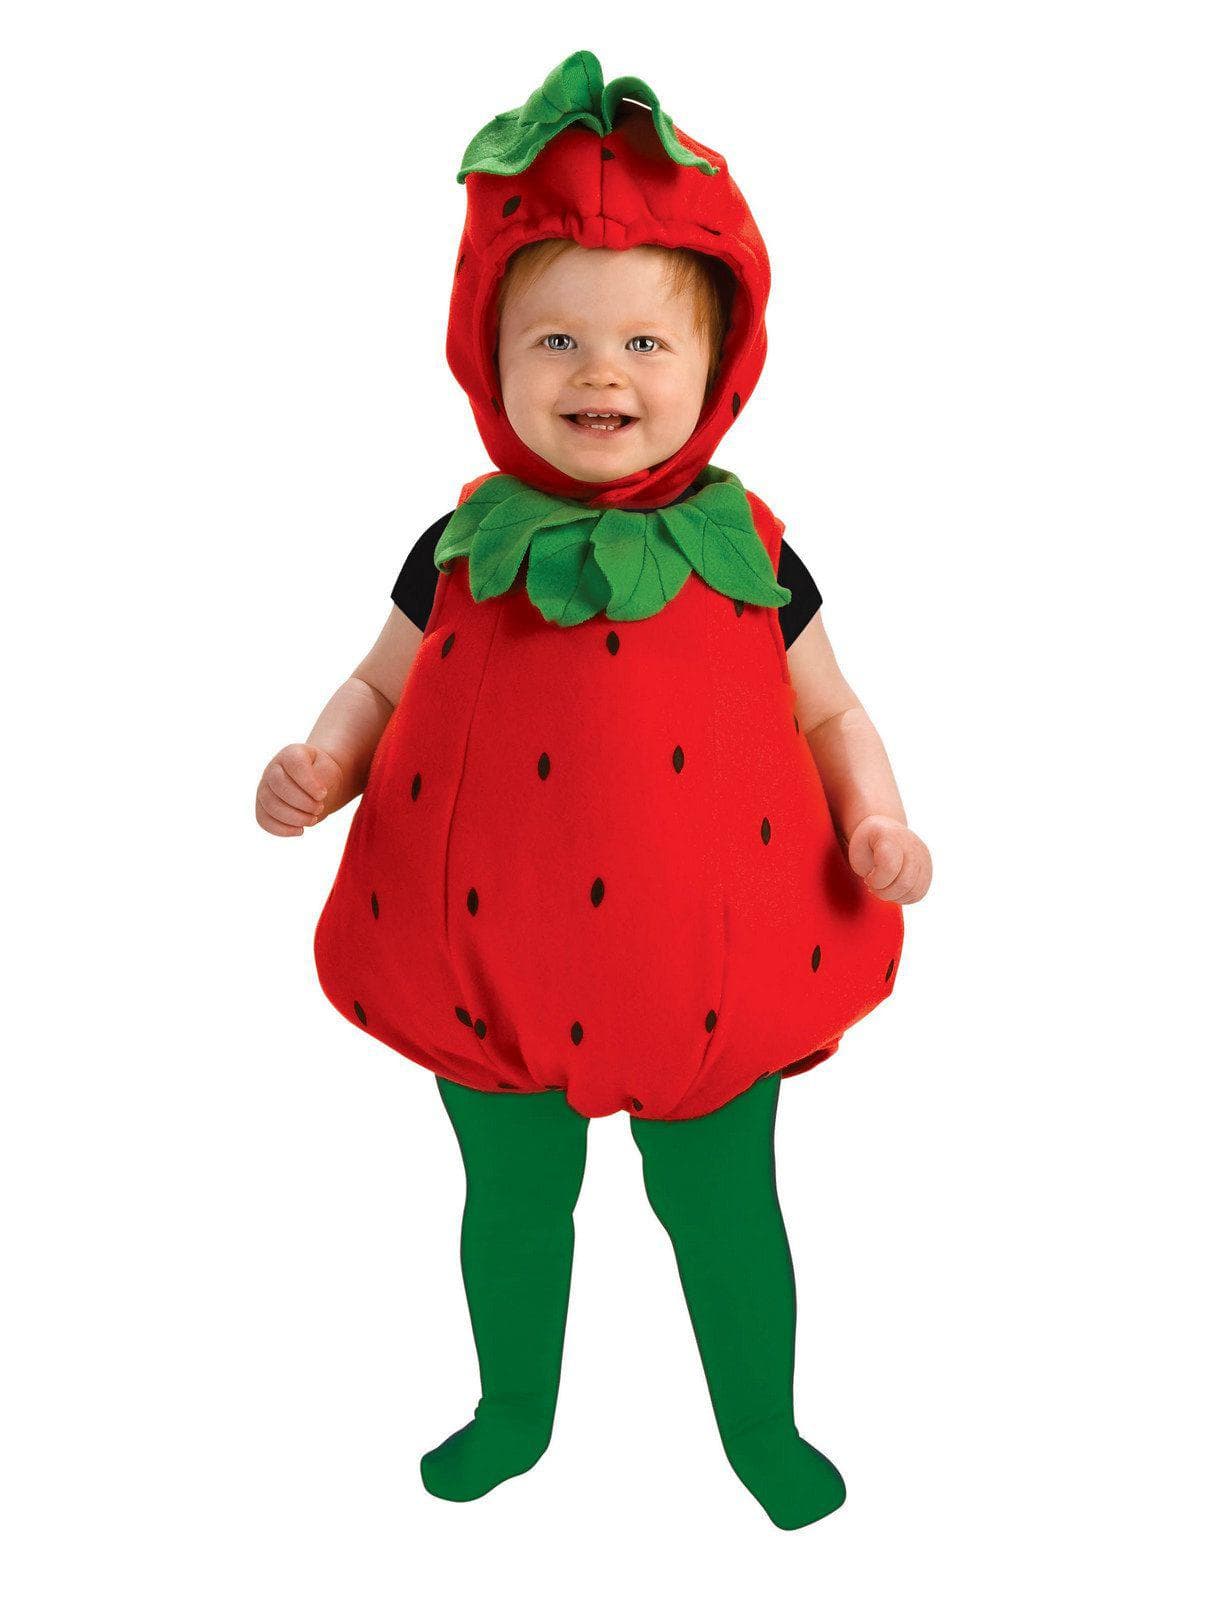 Baby/Toddler Berry Cute Costume - costumes.com